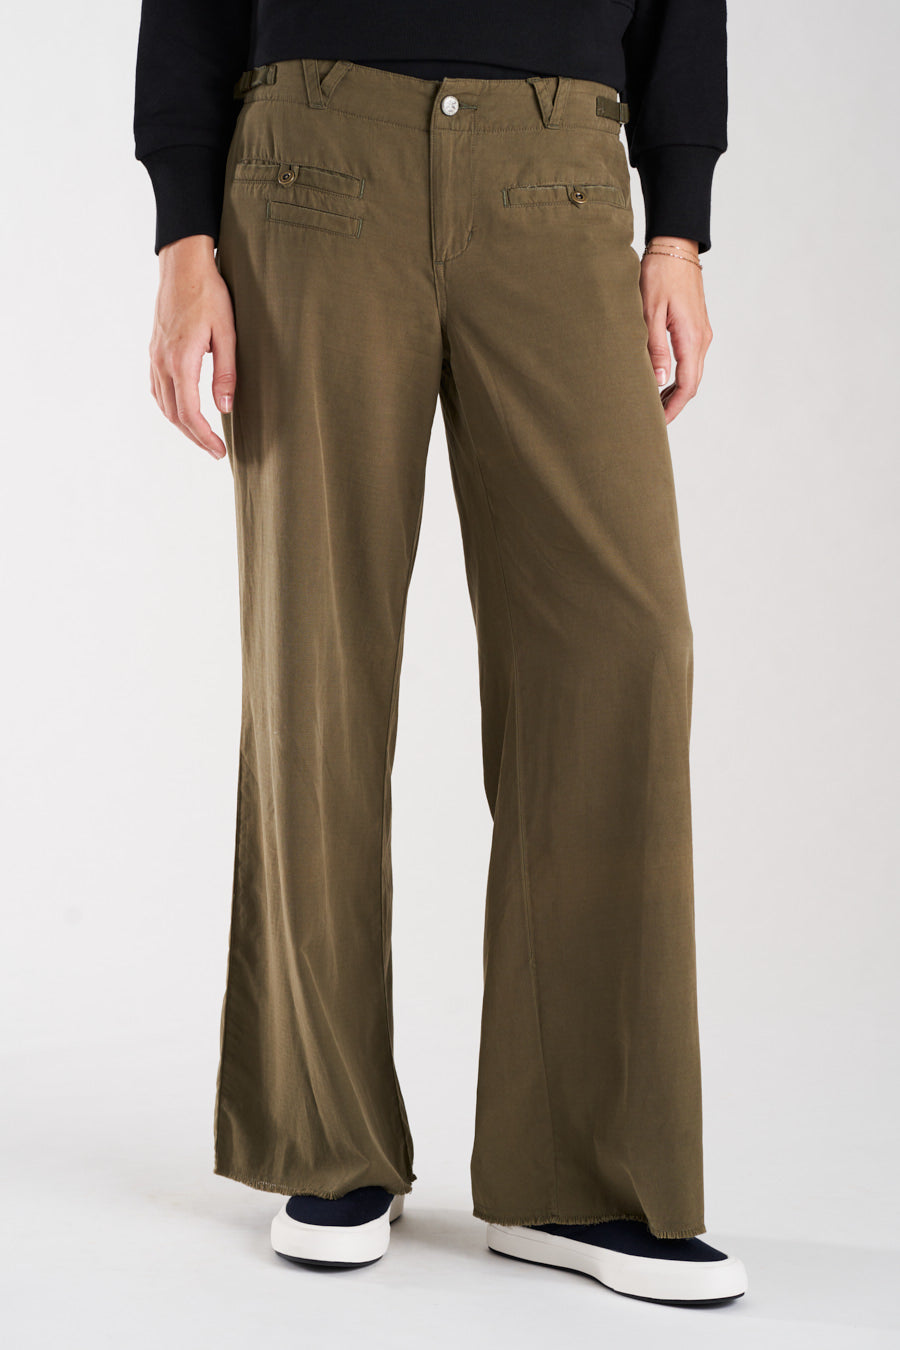 Silk wide leg pants in New Olive